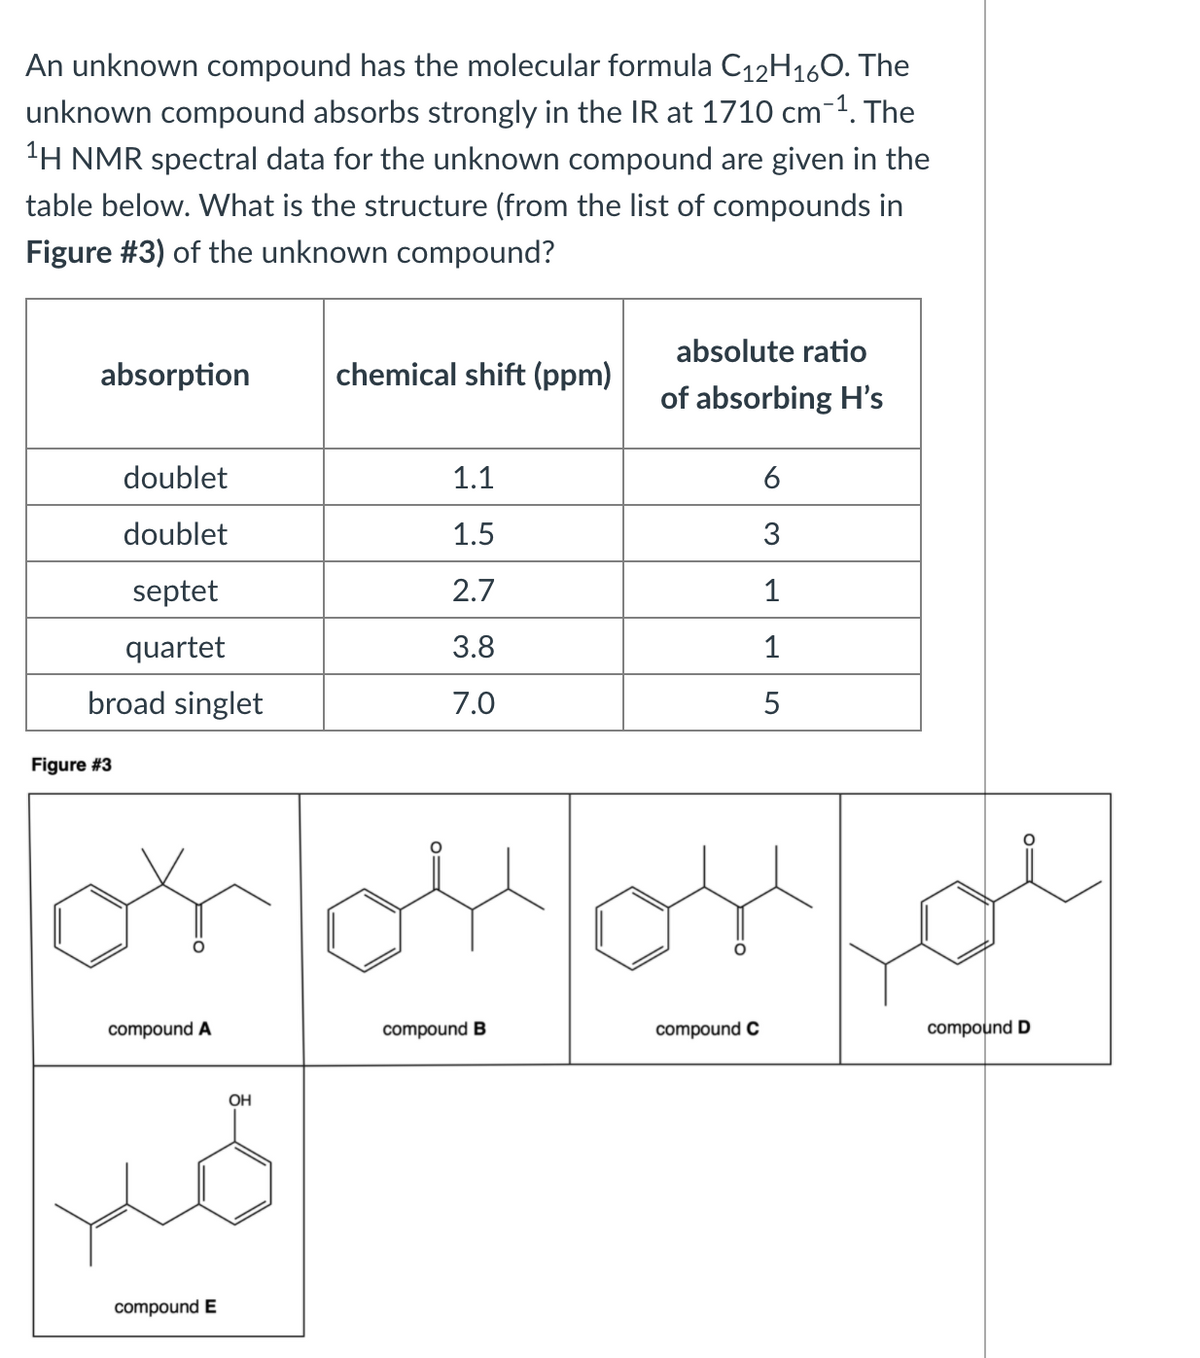 An unknown compound has the molecular formula C12H160. The
unknown compound absorbs strongly in the IR at 1710 cm
-1. The
'H NMR spectral data for the unknown compound are given in the
table below. What is the structure (from the list of compounds in
Figure #3) of the unknown compound?
absolute ratio
absorption
chemical shift (ppm)
of absorbing H's
doublet
1.1
6
doublet
1.5
3
septet
2.7
1
quartet
3.8
1
broad singlet
7.0
5
Figure #3
compound A
compound B
compound C
compound D
OH
compound E
